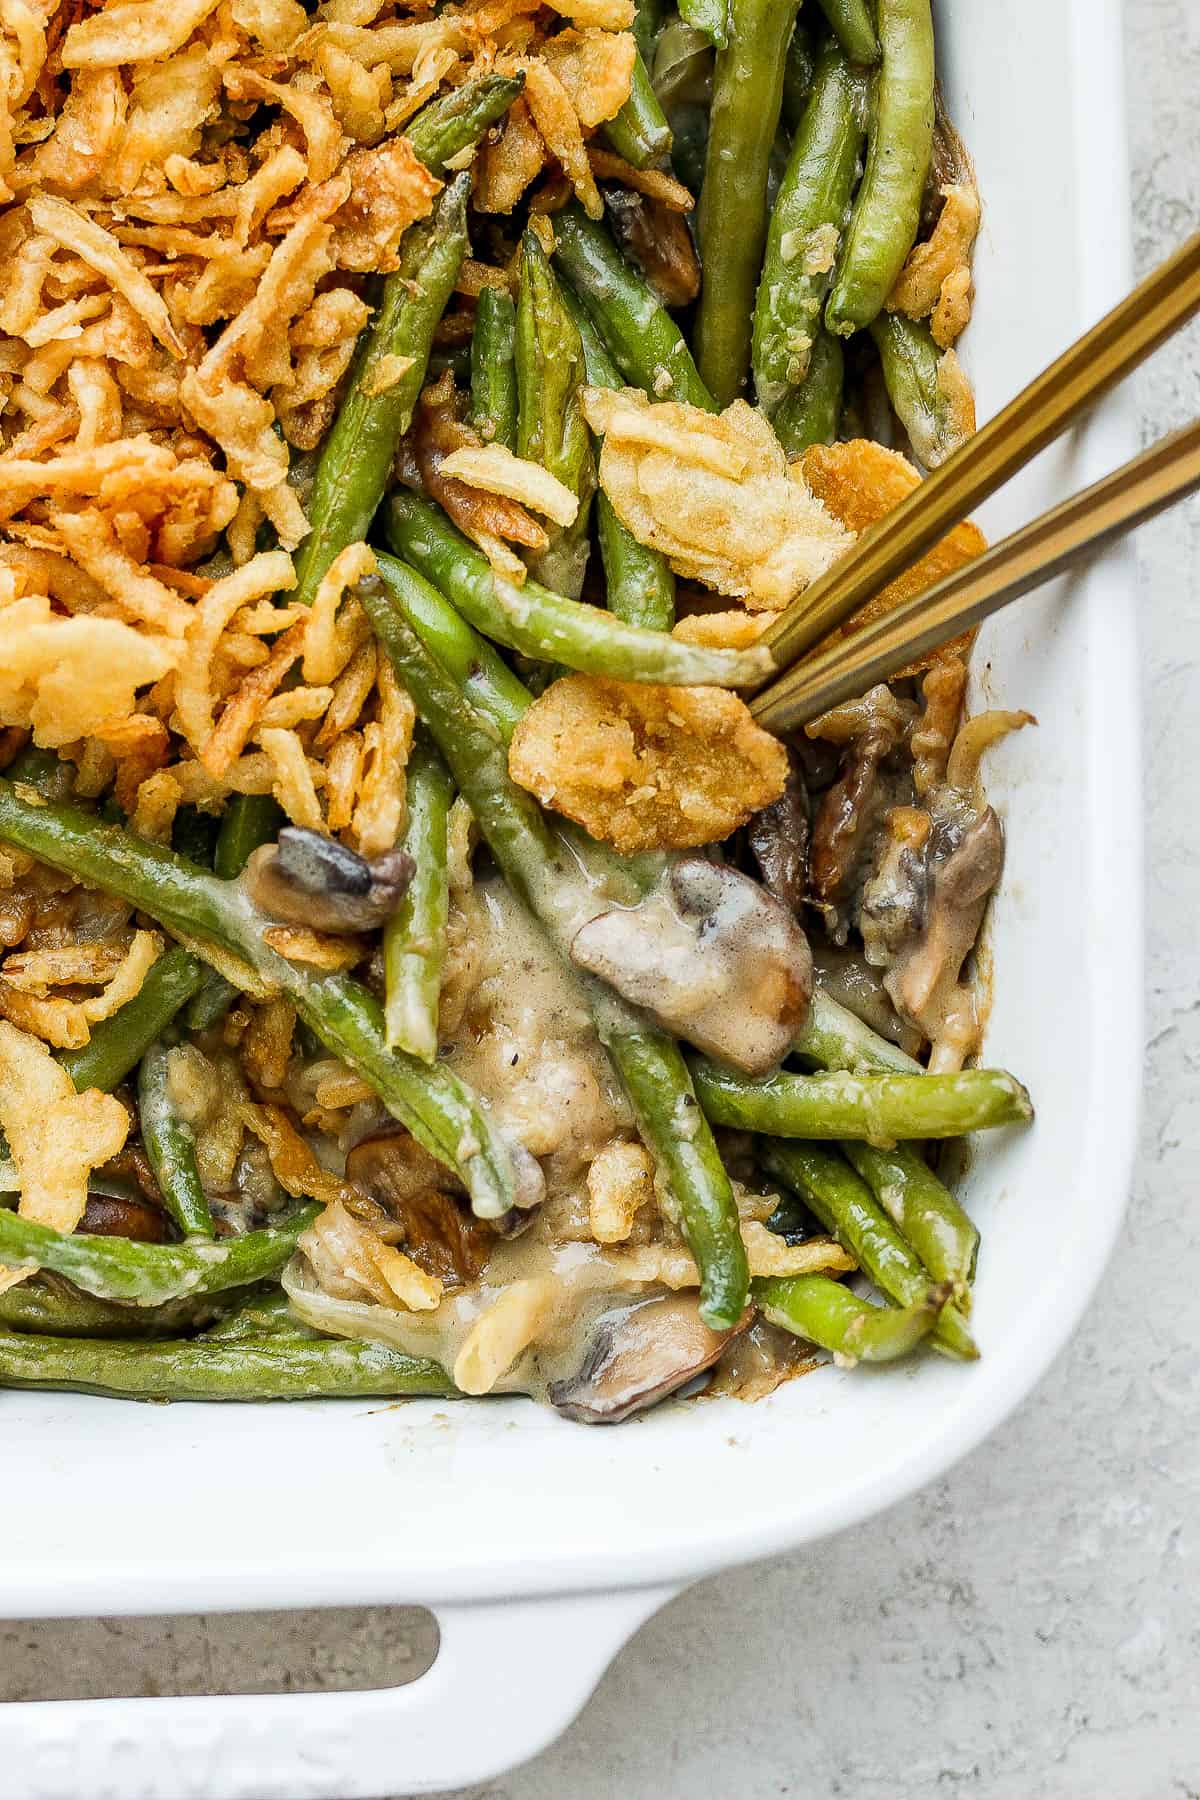 Two spoons in the green bean casserole.